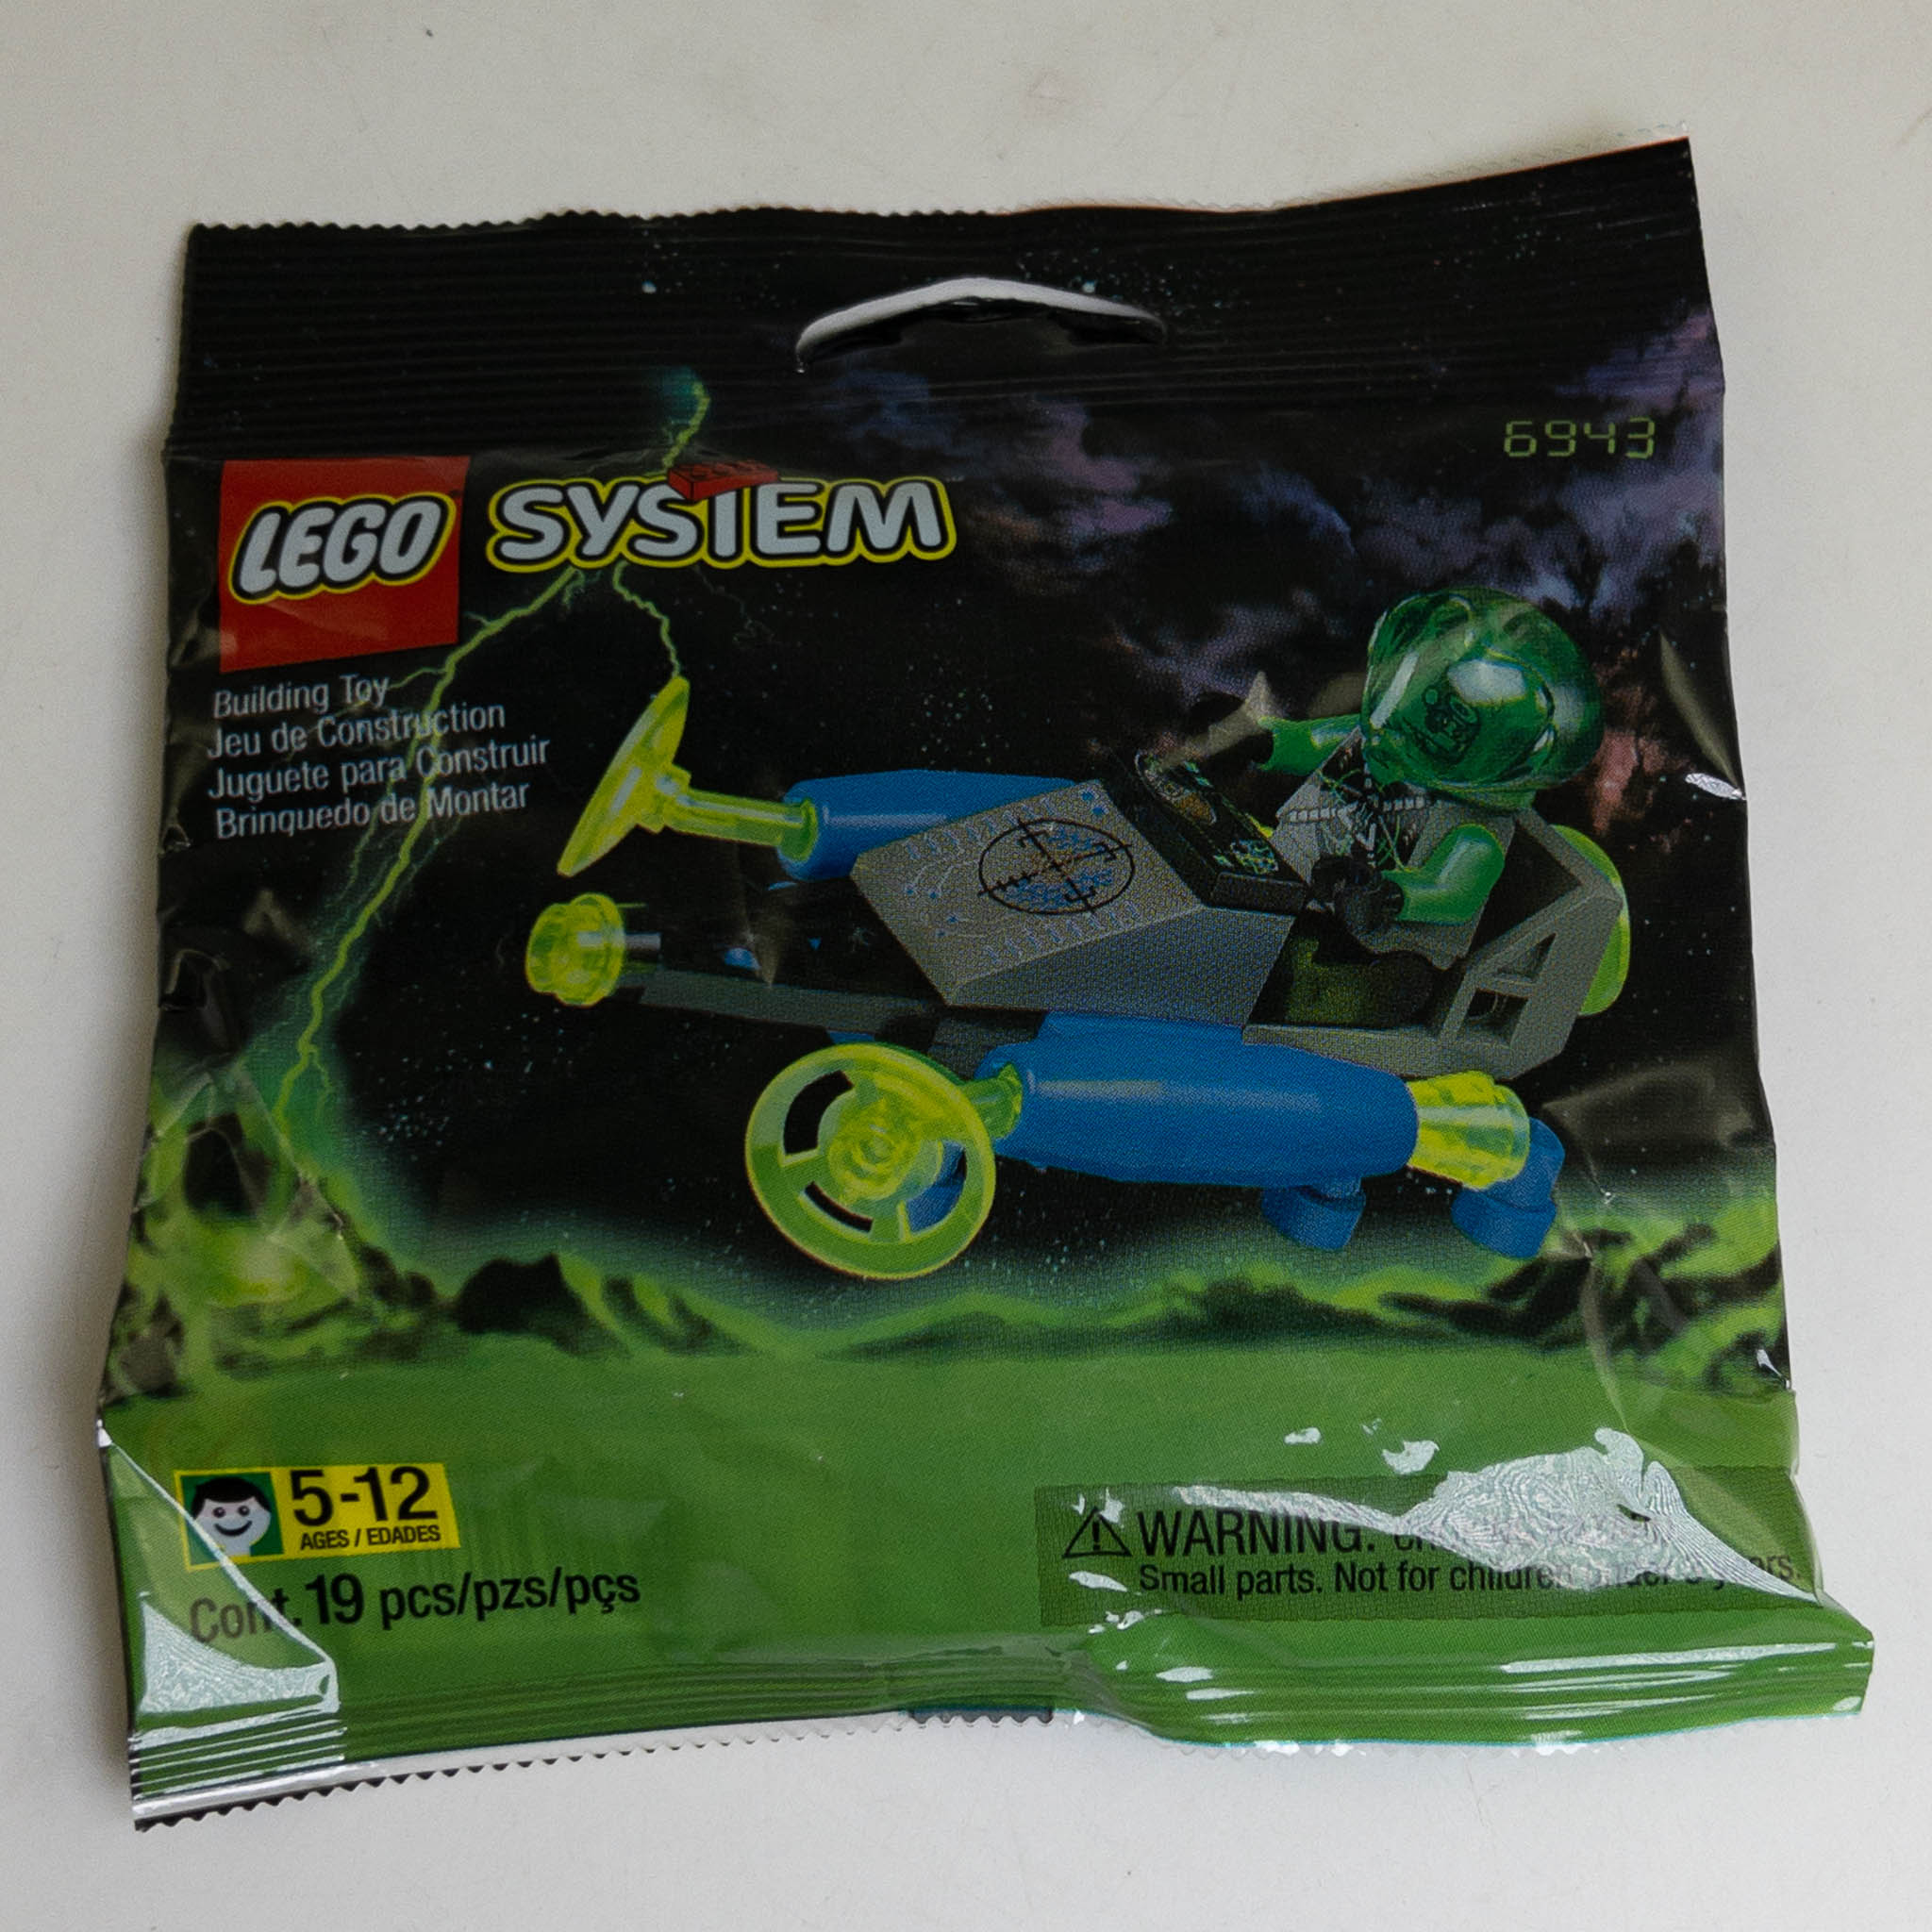 Lego System - SPEED SLED (#6943) (19 pieces) (Unopened - NON-MINT BOX): BBToyStore.com - Toys, Trading Cards, Action & Games online retail store shop sale